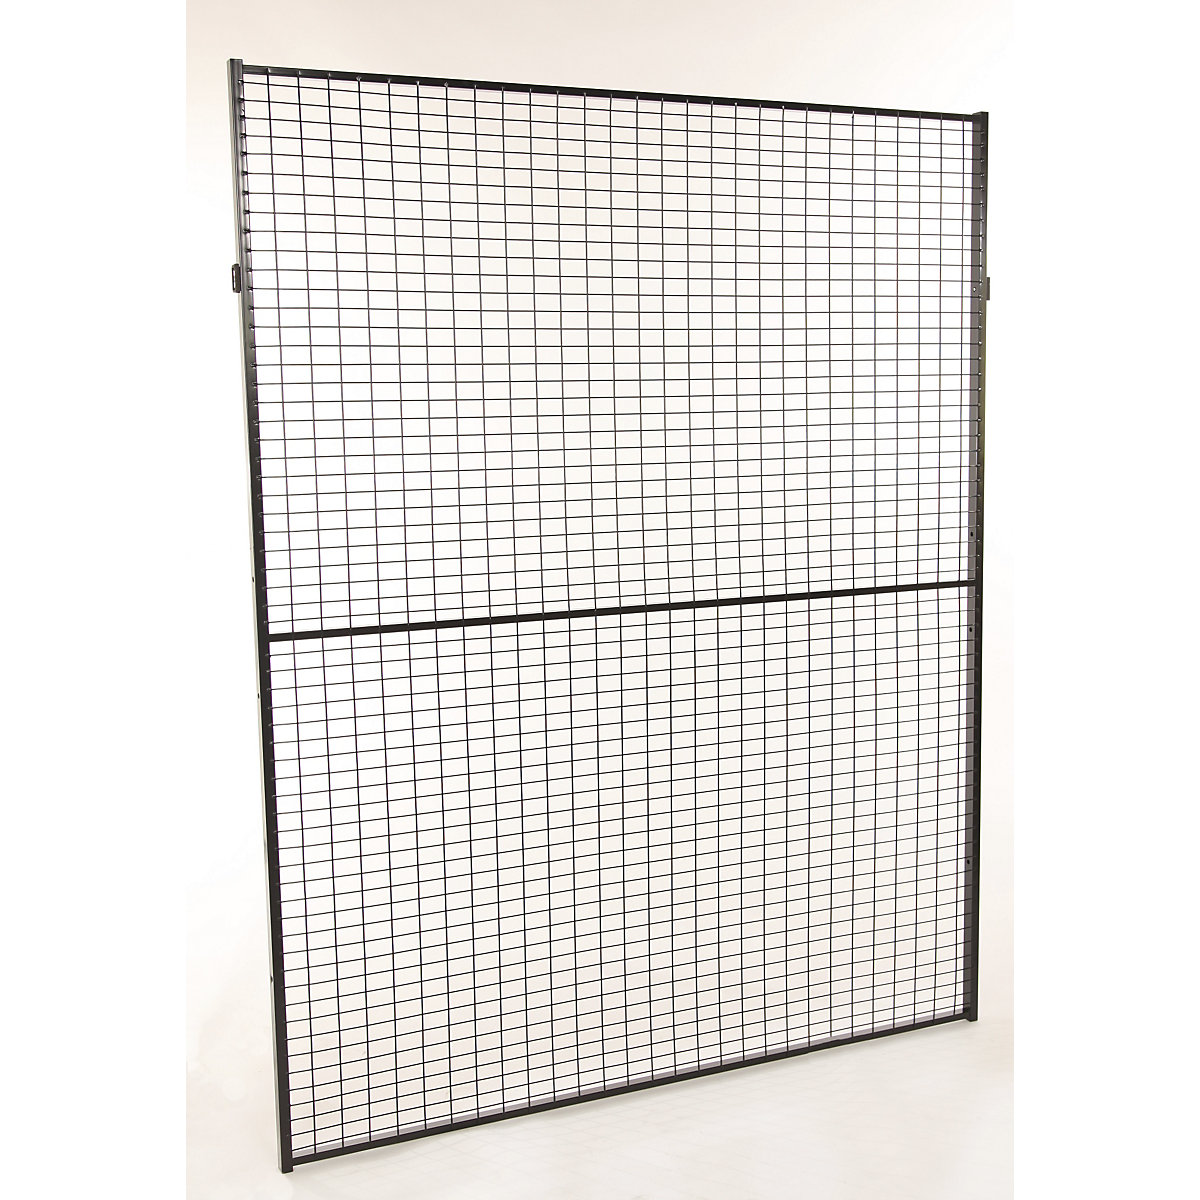 X-GUARD CLASSIC machine protective fencing, wall section – Axelent, height 2200 mm, width 1300 mm-11